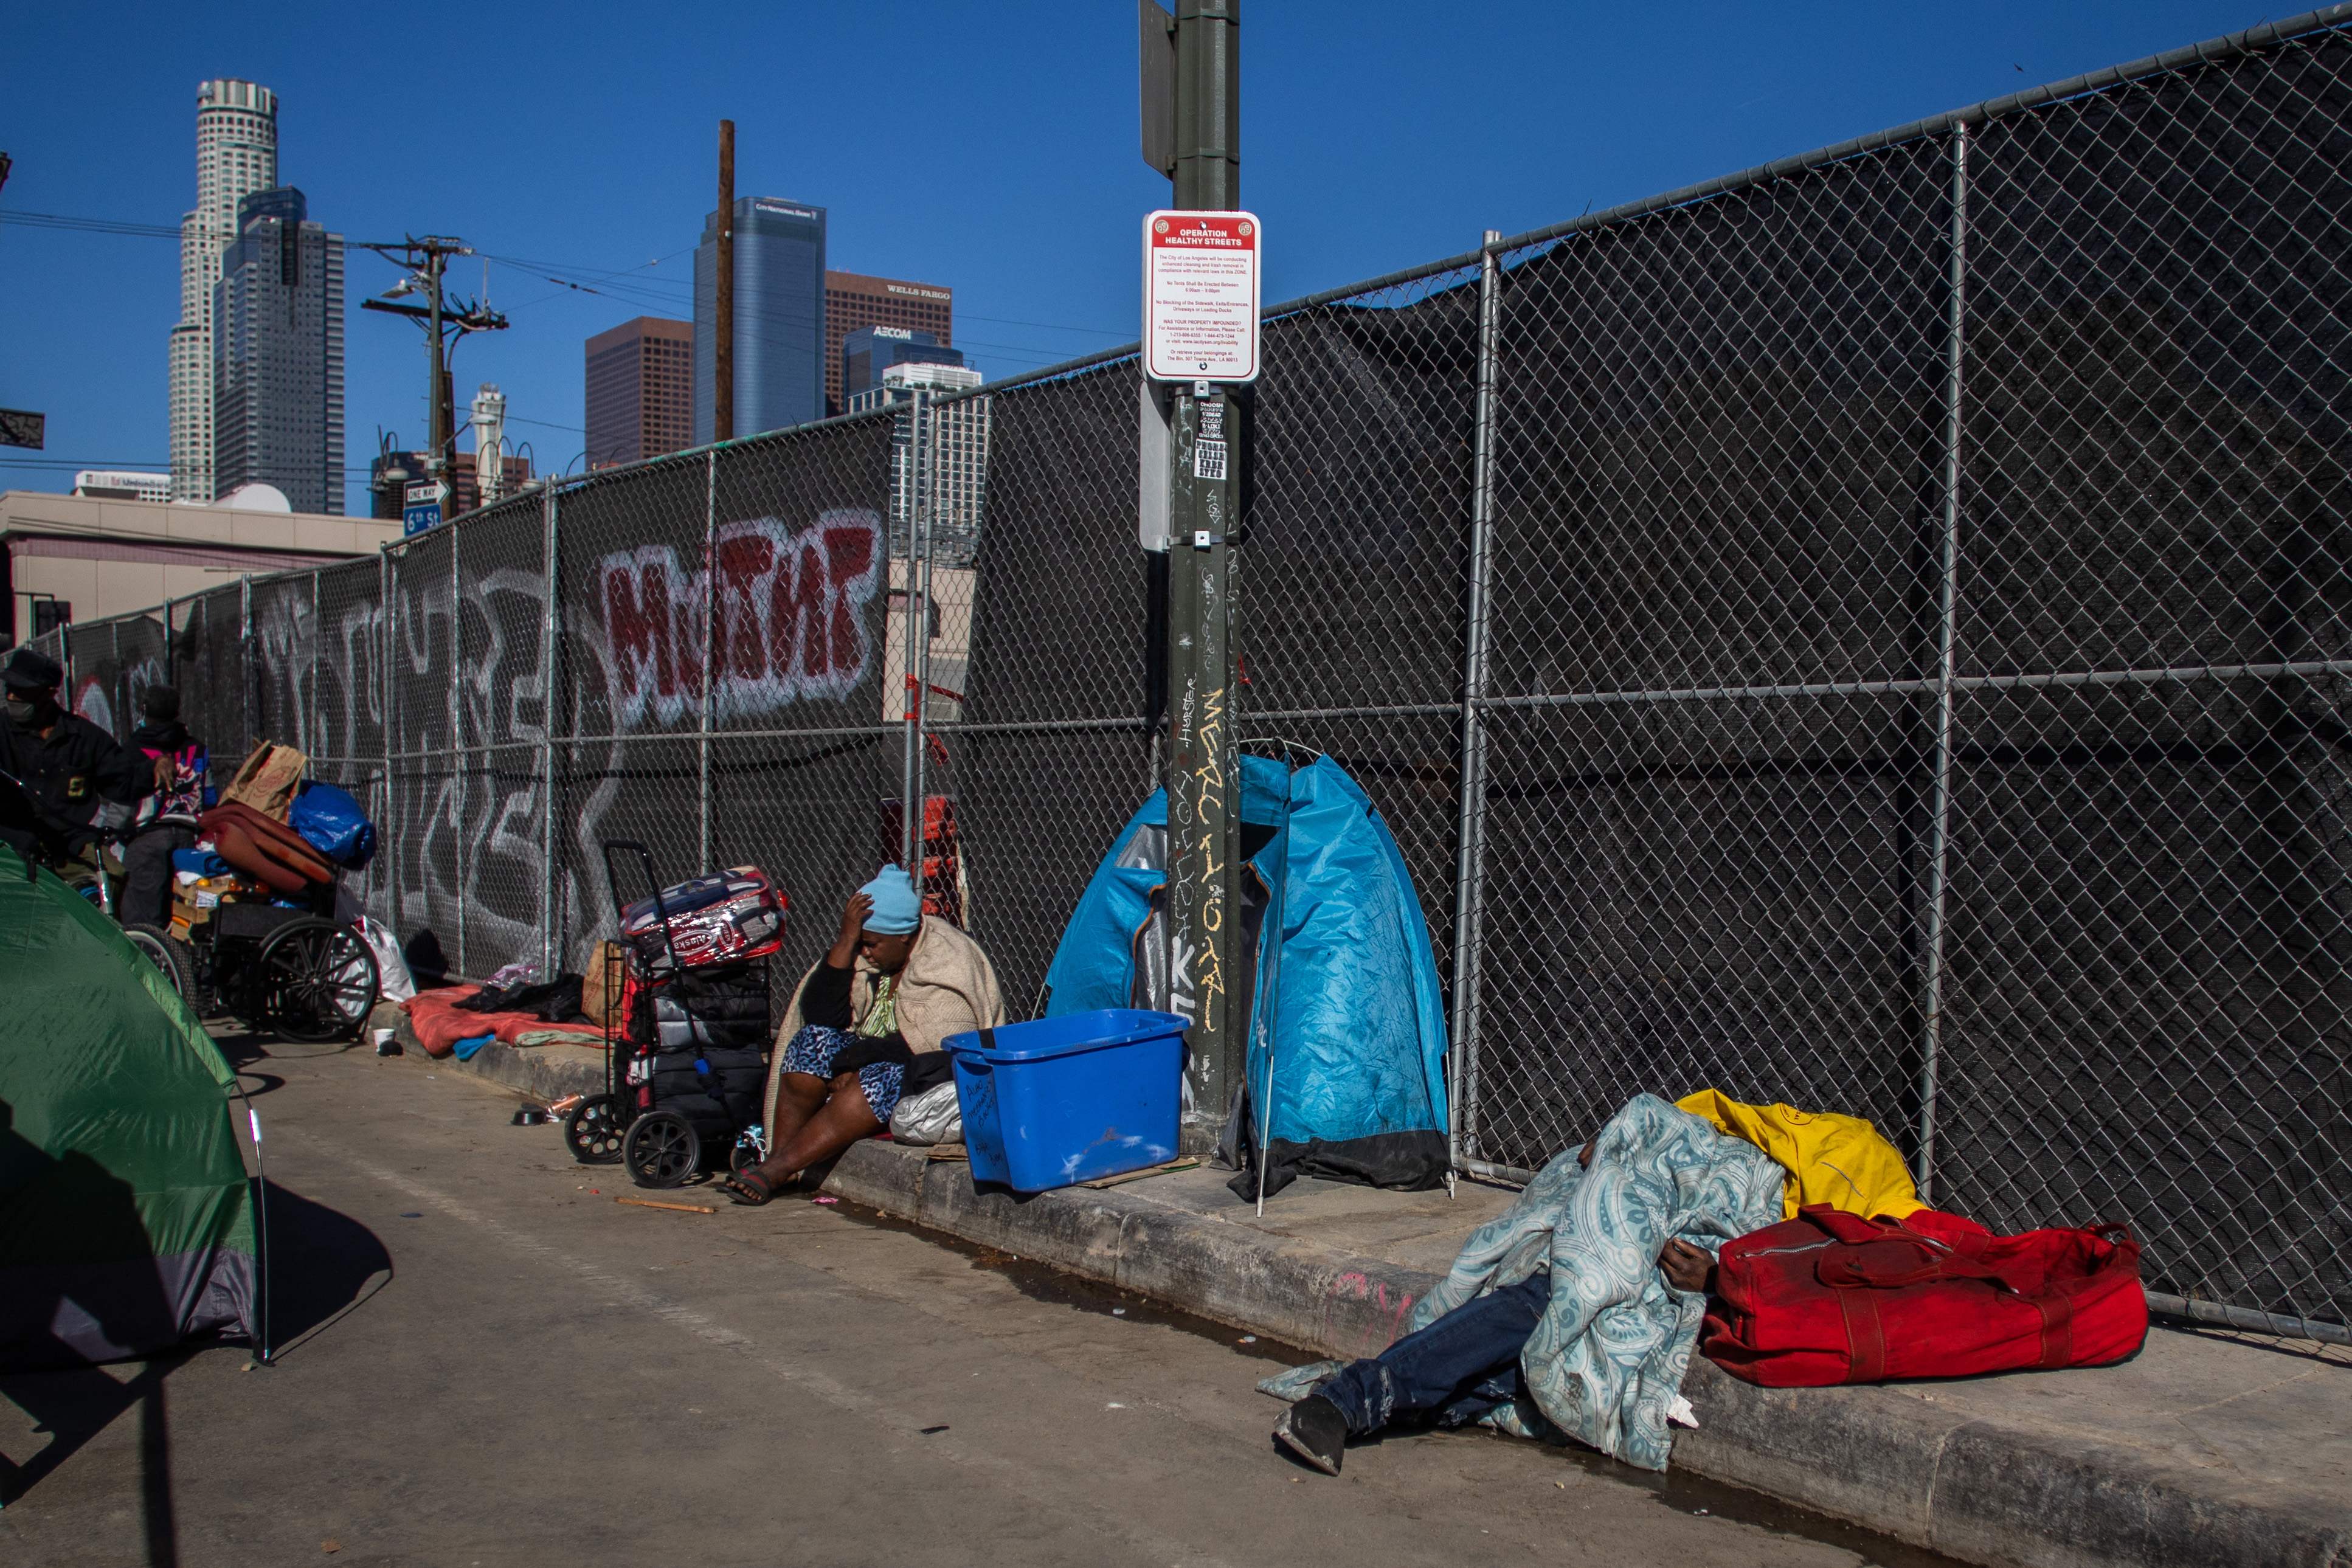 The Skid Row homeless encampment in downtown Los Angeles is home to around 8,000 people